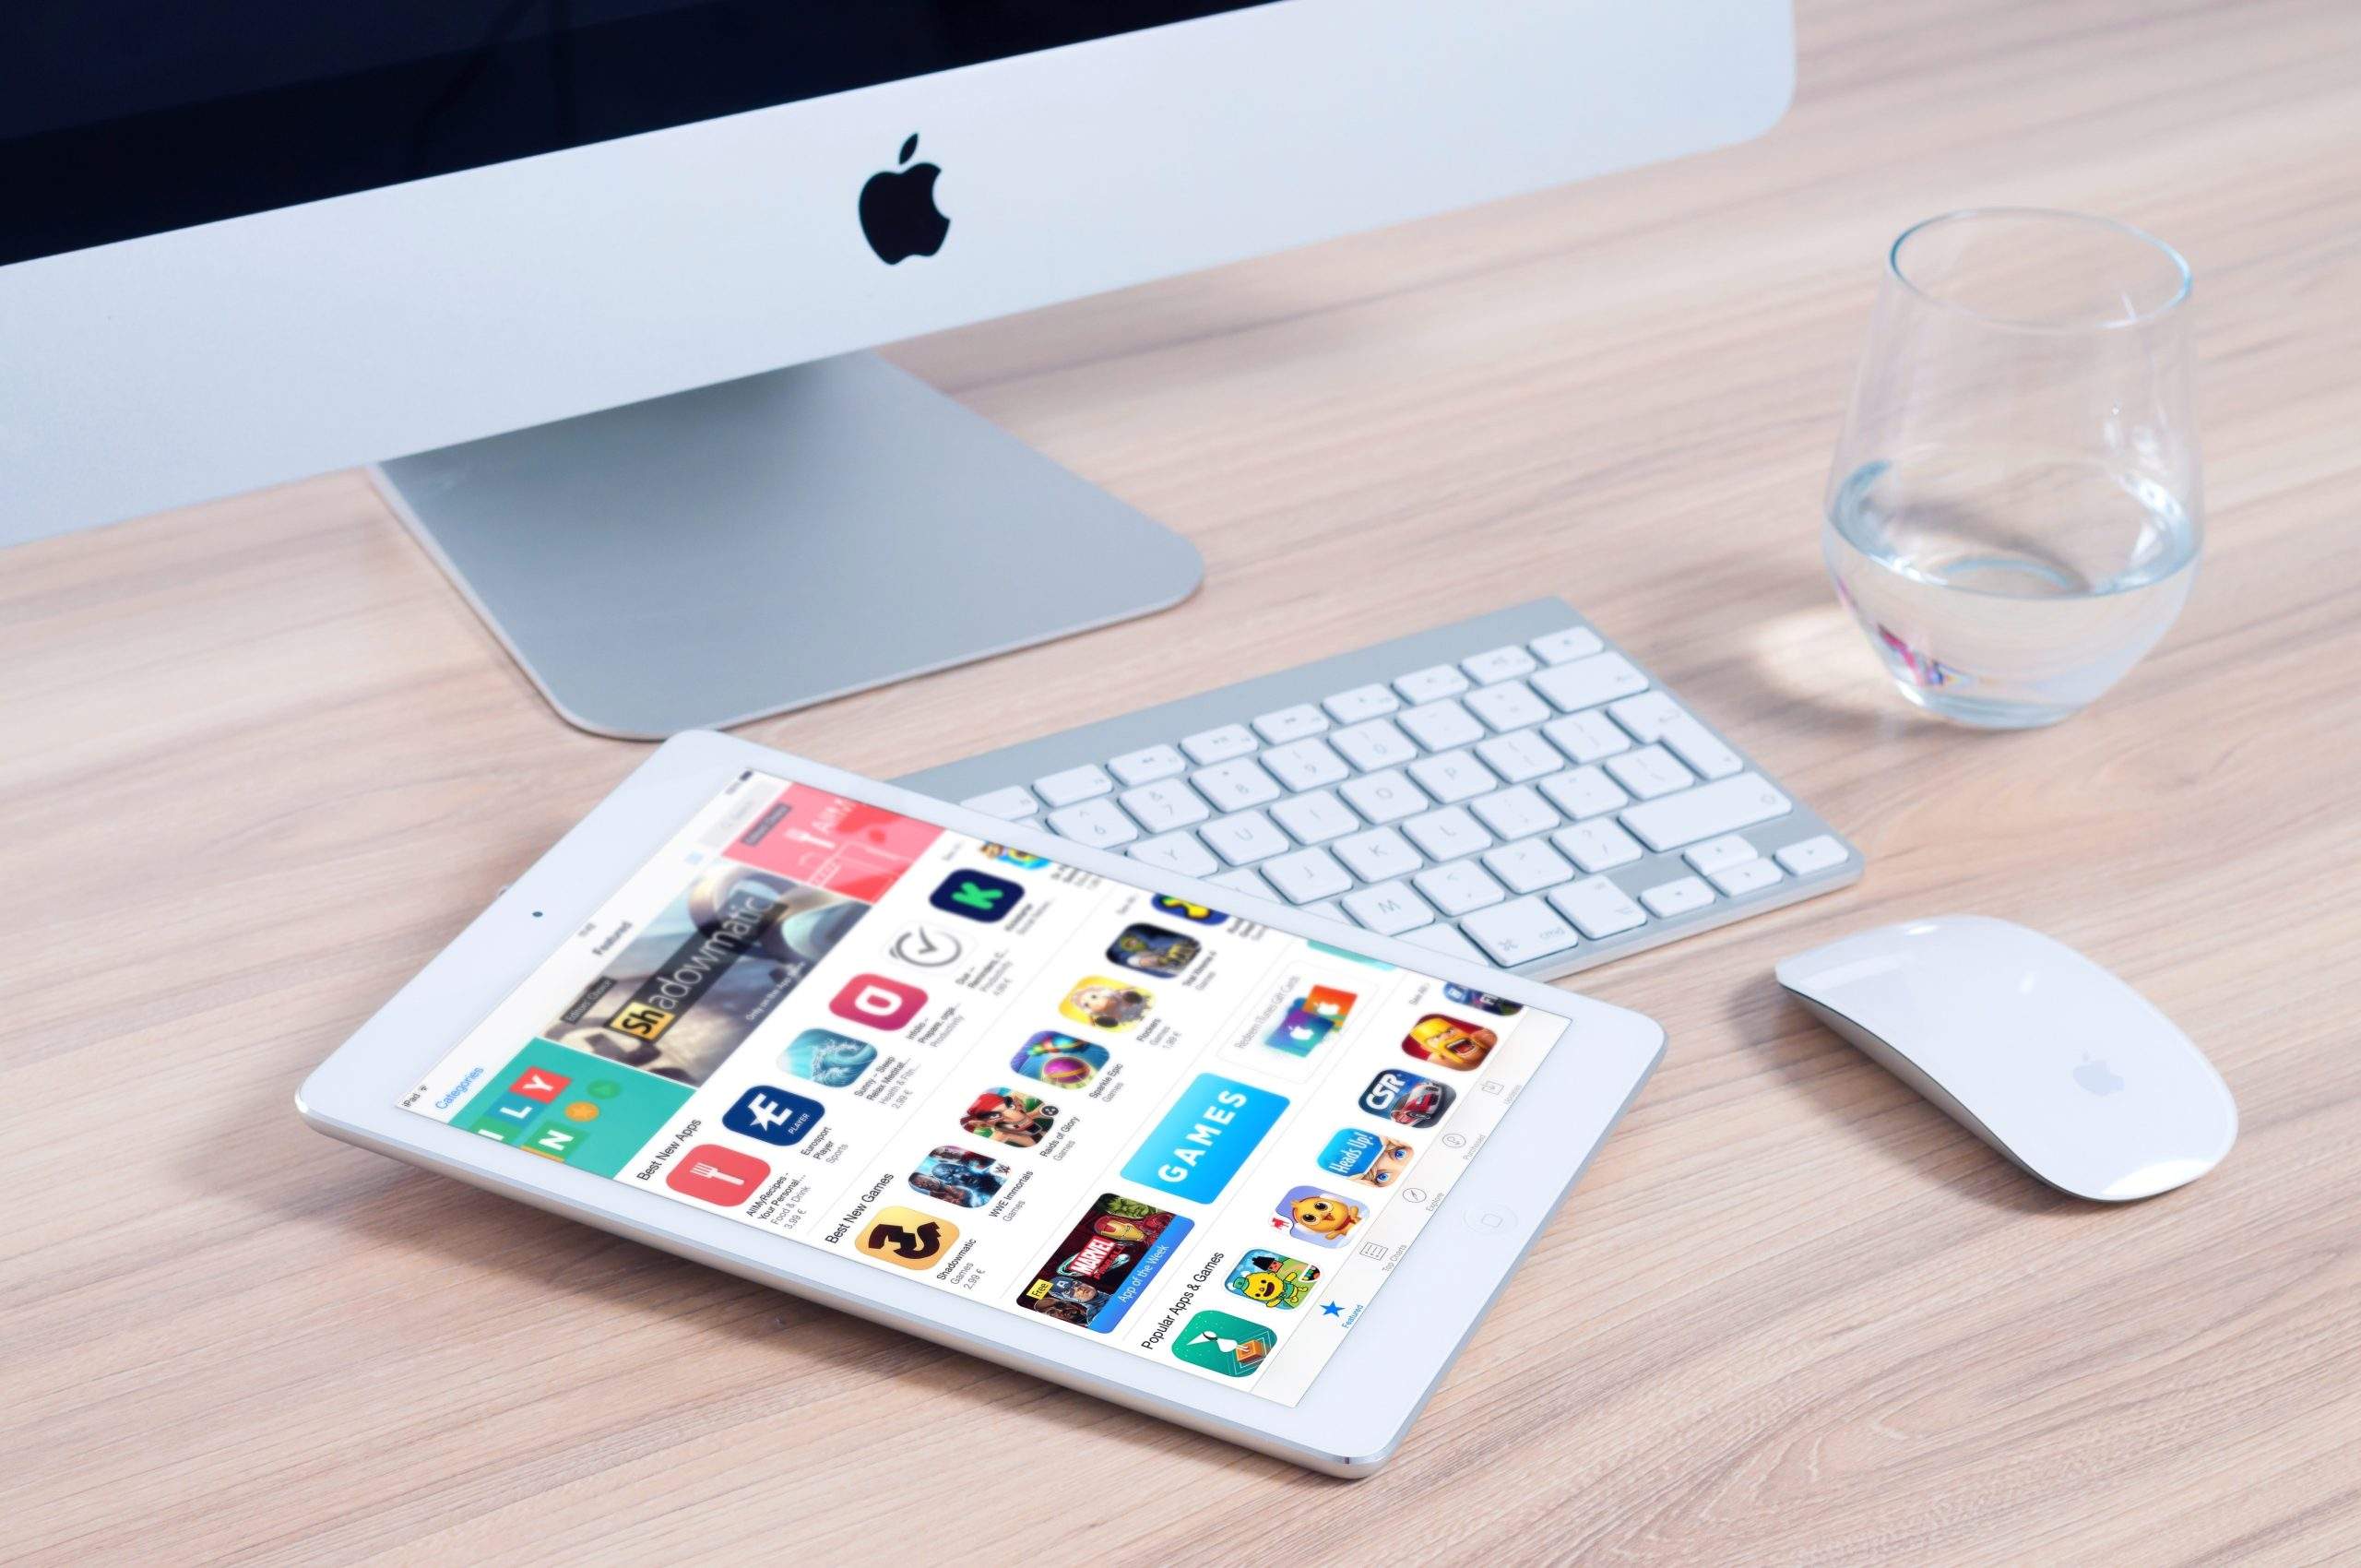 Optimize for App Store and Social Media